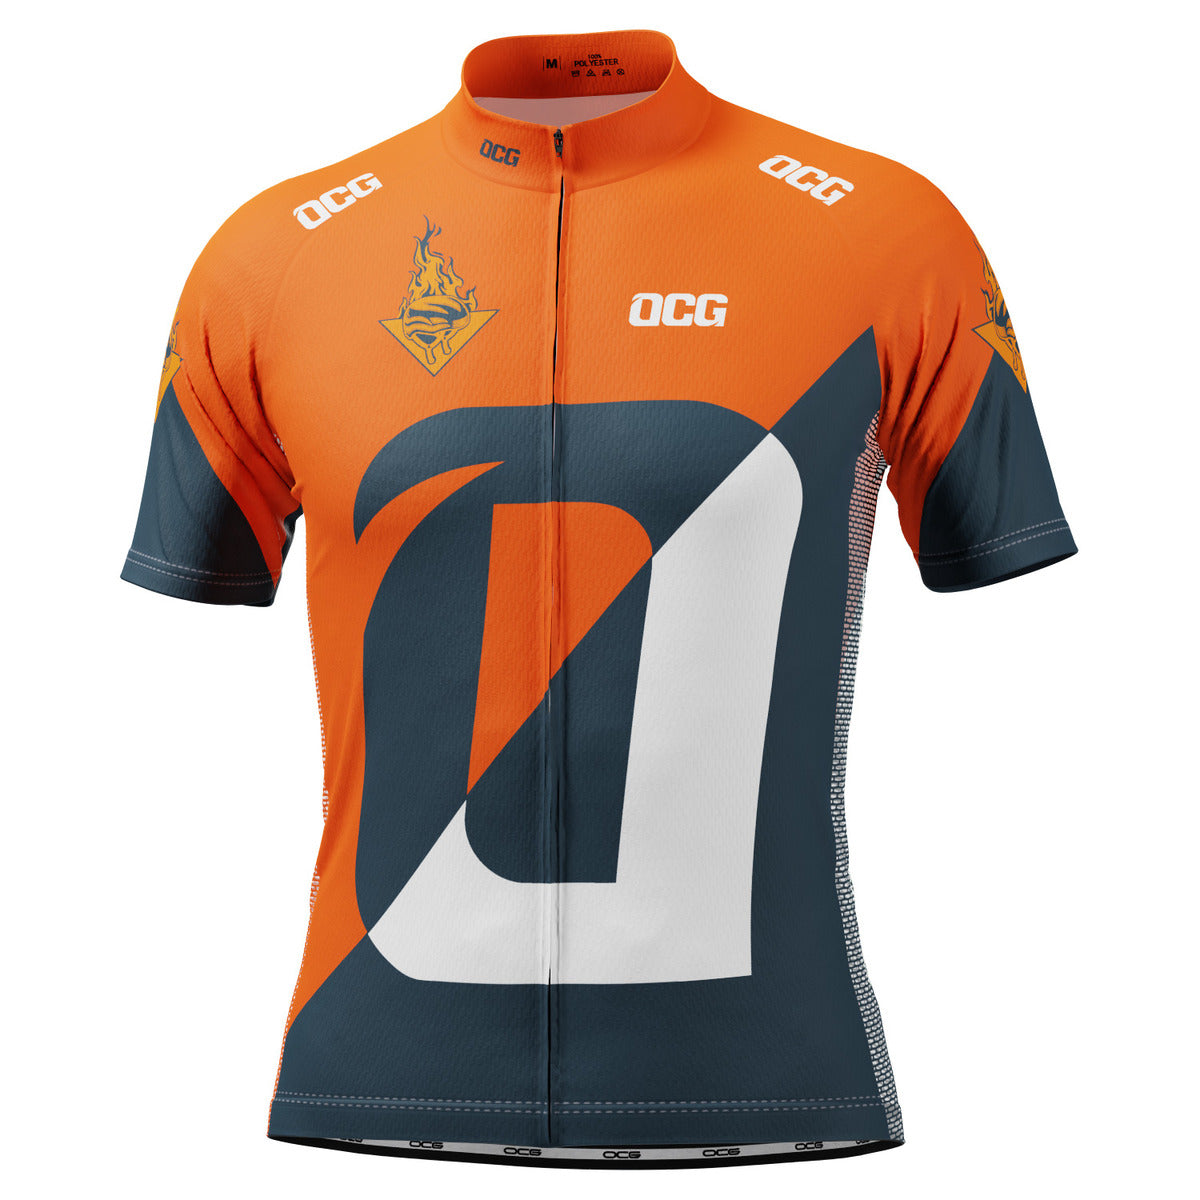 Men's The Greater West Short Sleeve Cycling Jersey